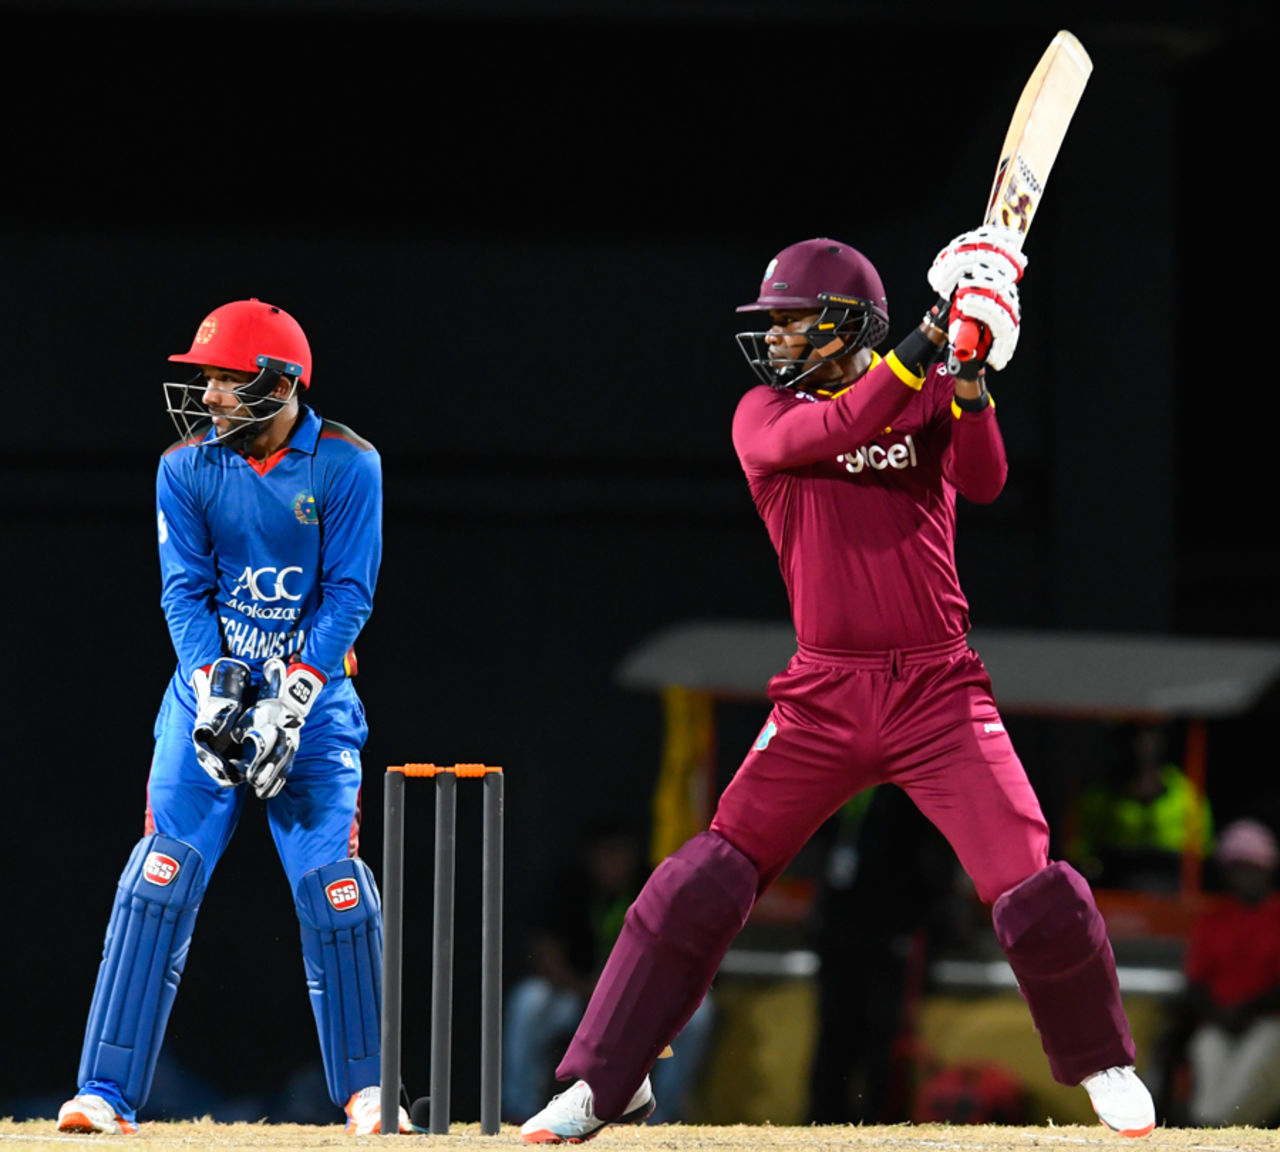 Marlon Samuels cuts one square, West Indies v Afghanistan, 3rd T20I, St Kitts, June 5, 2017